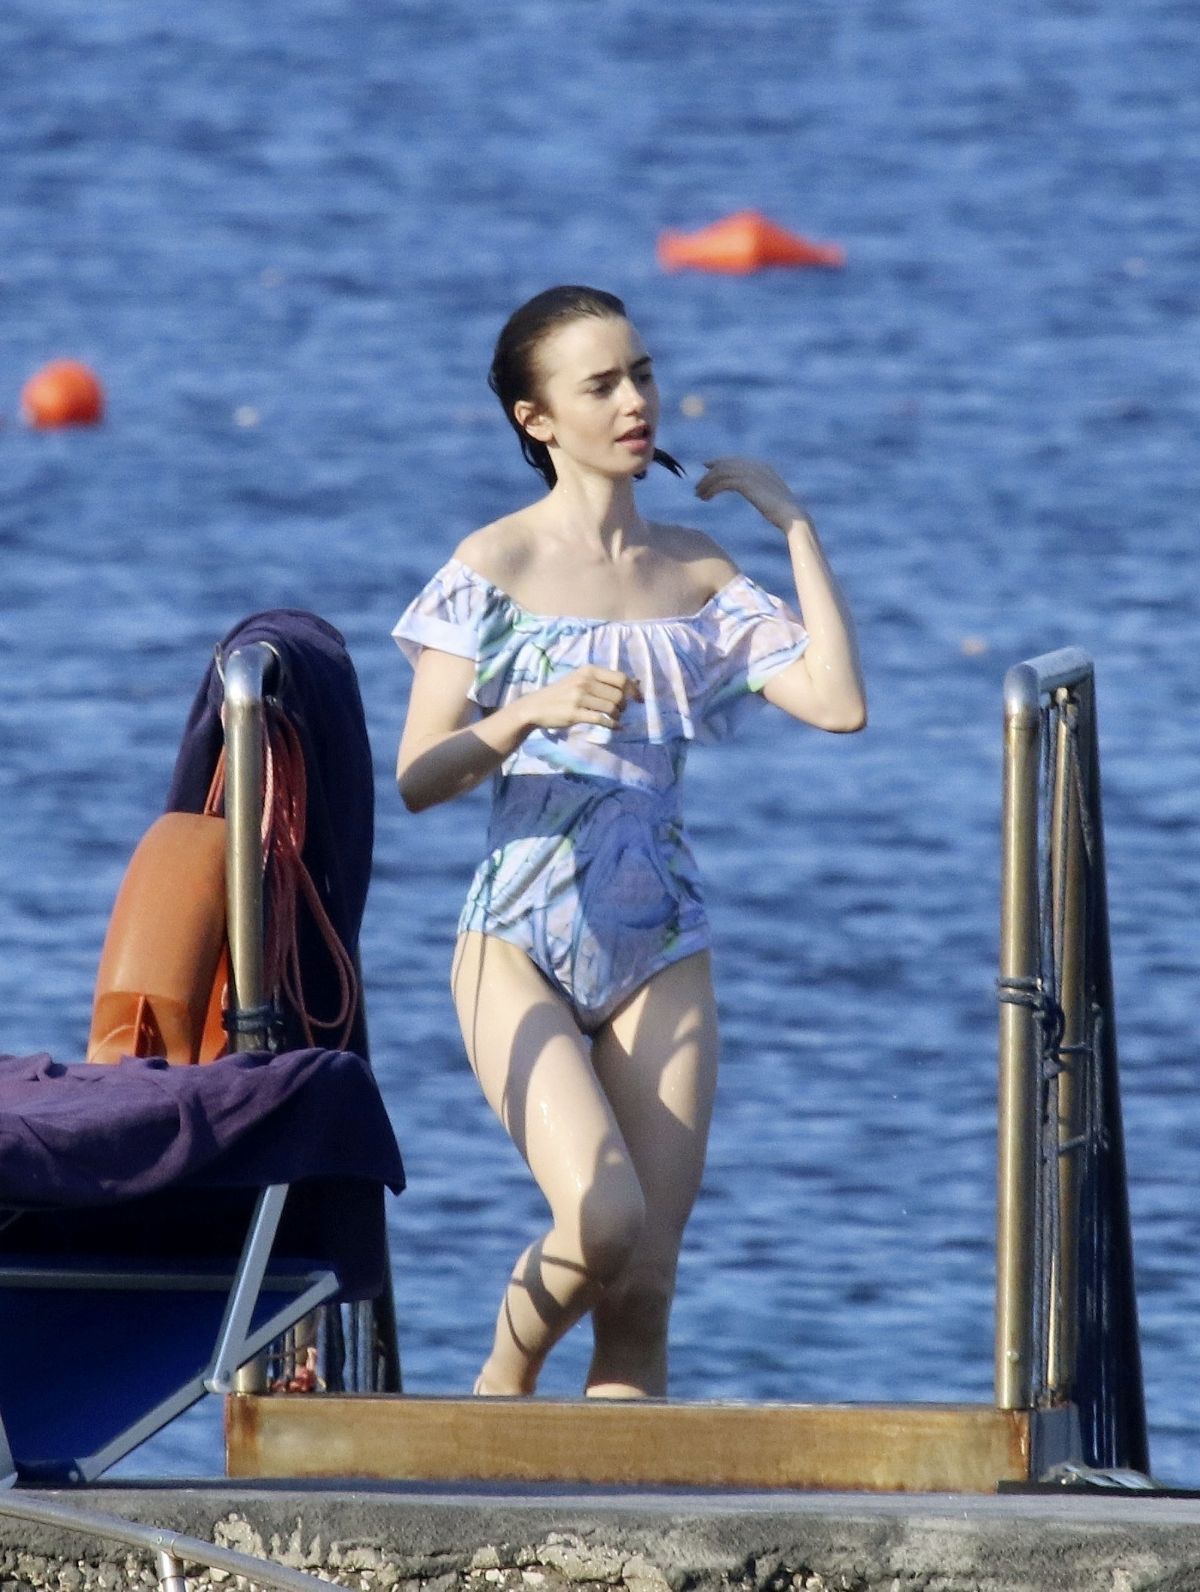 lily-collins-in-swimsuit-at-a-beach-in-ischia-07-18-2017_10.